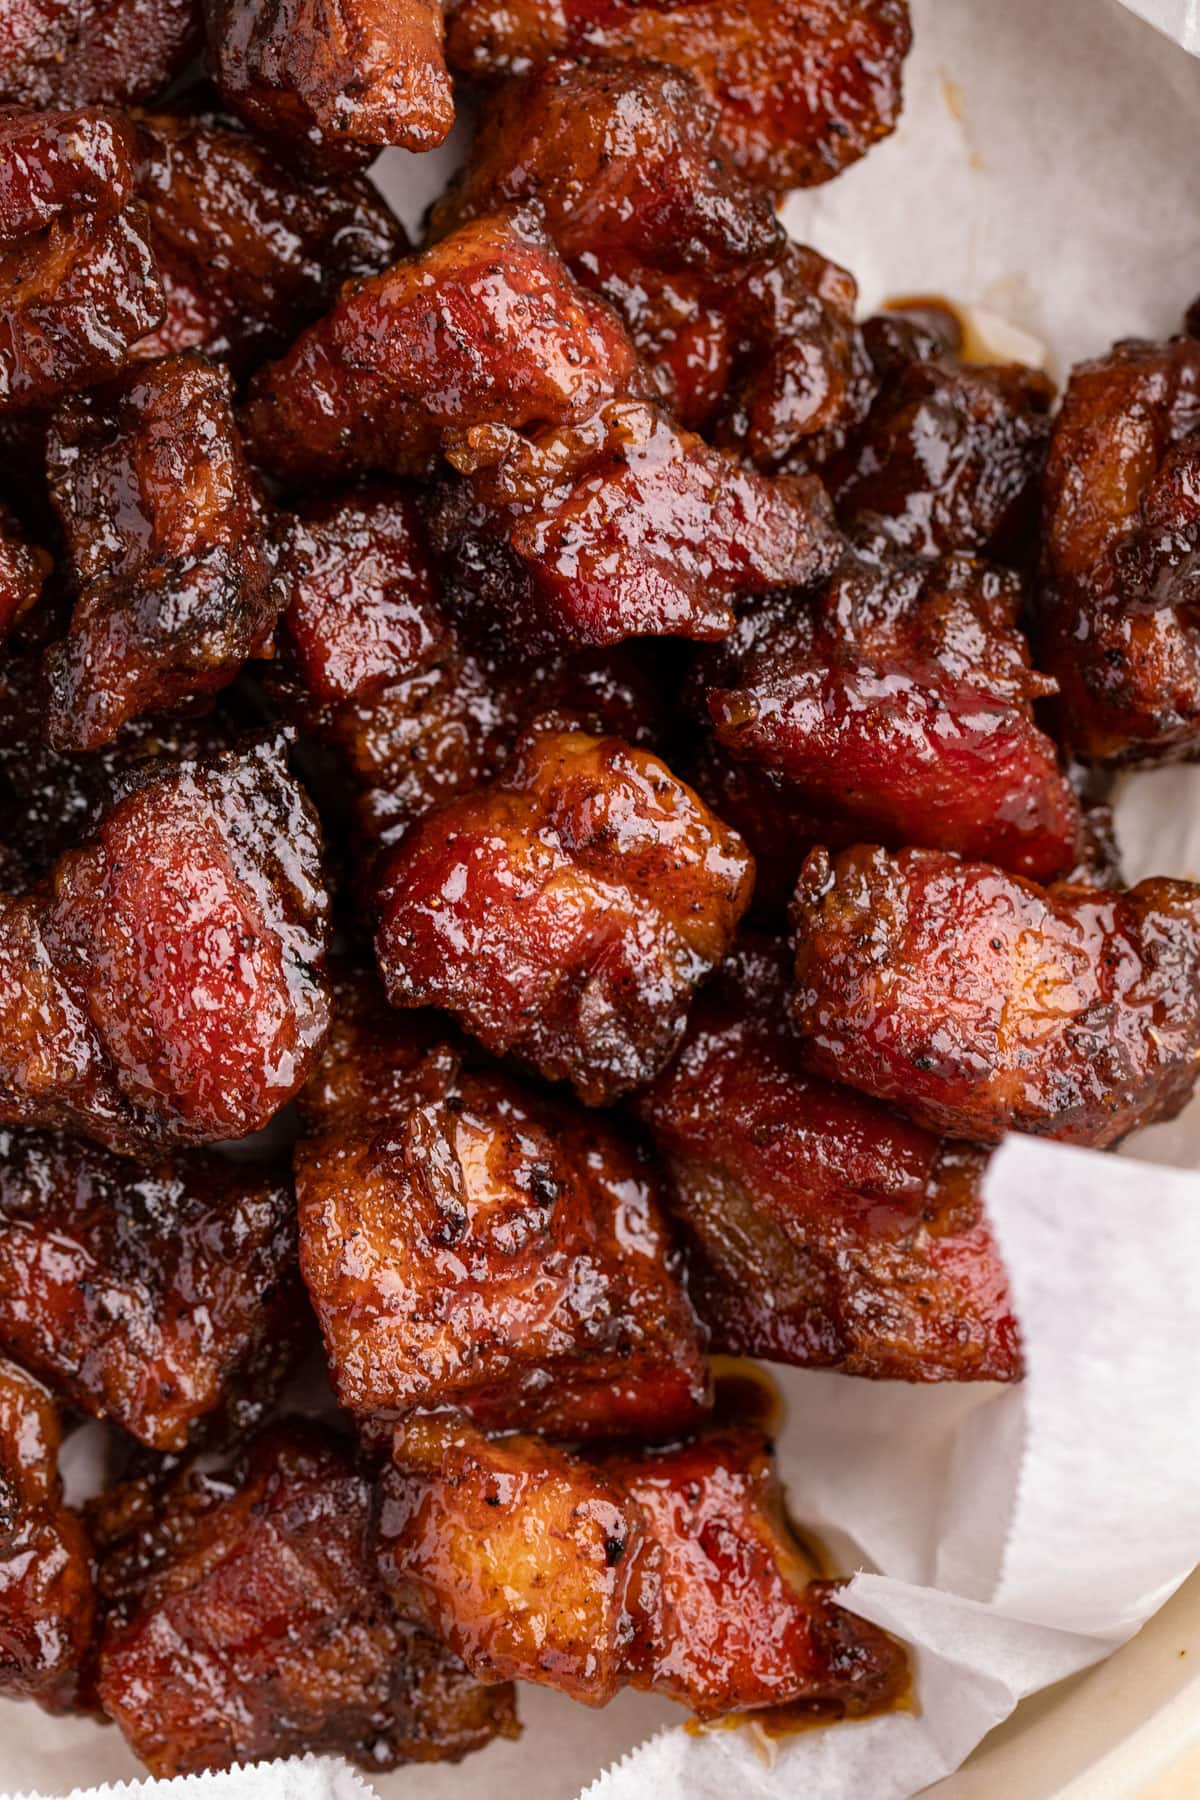 Pork belly burnt ends on white parchment paper.